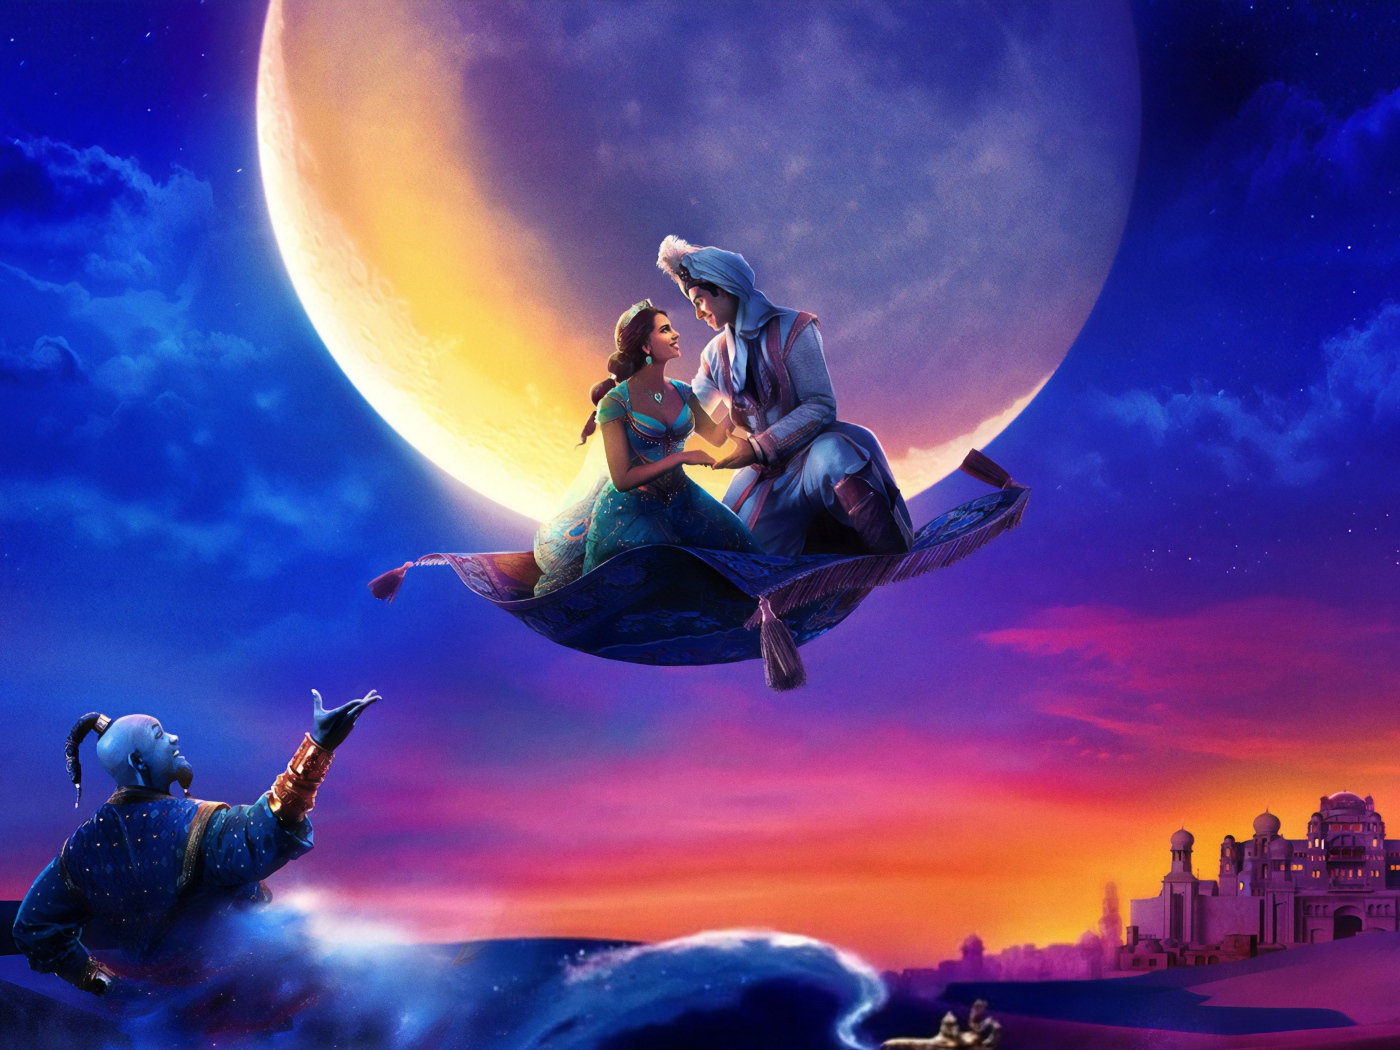 Aladdin and Jasmine on the carpet plane on the background of the moon